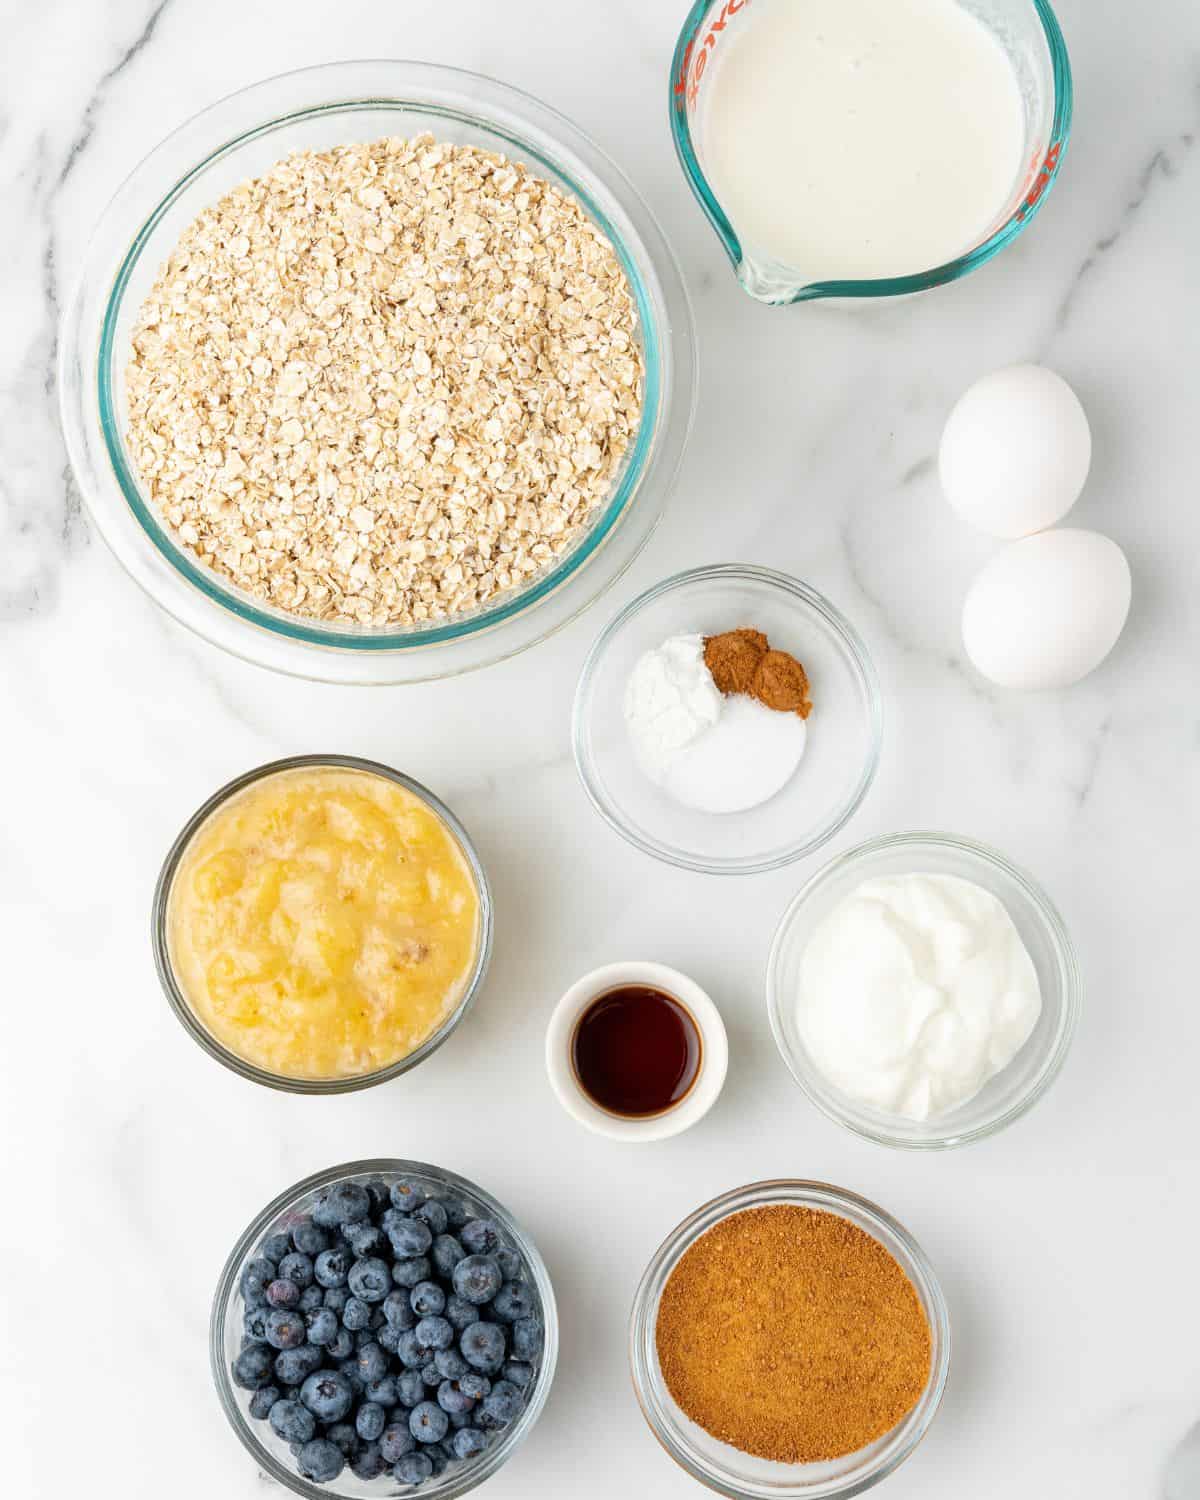 ingredients for blueberry baked oatmeal cups.